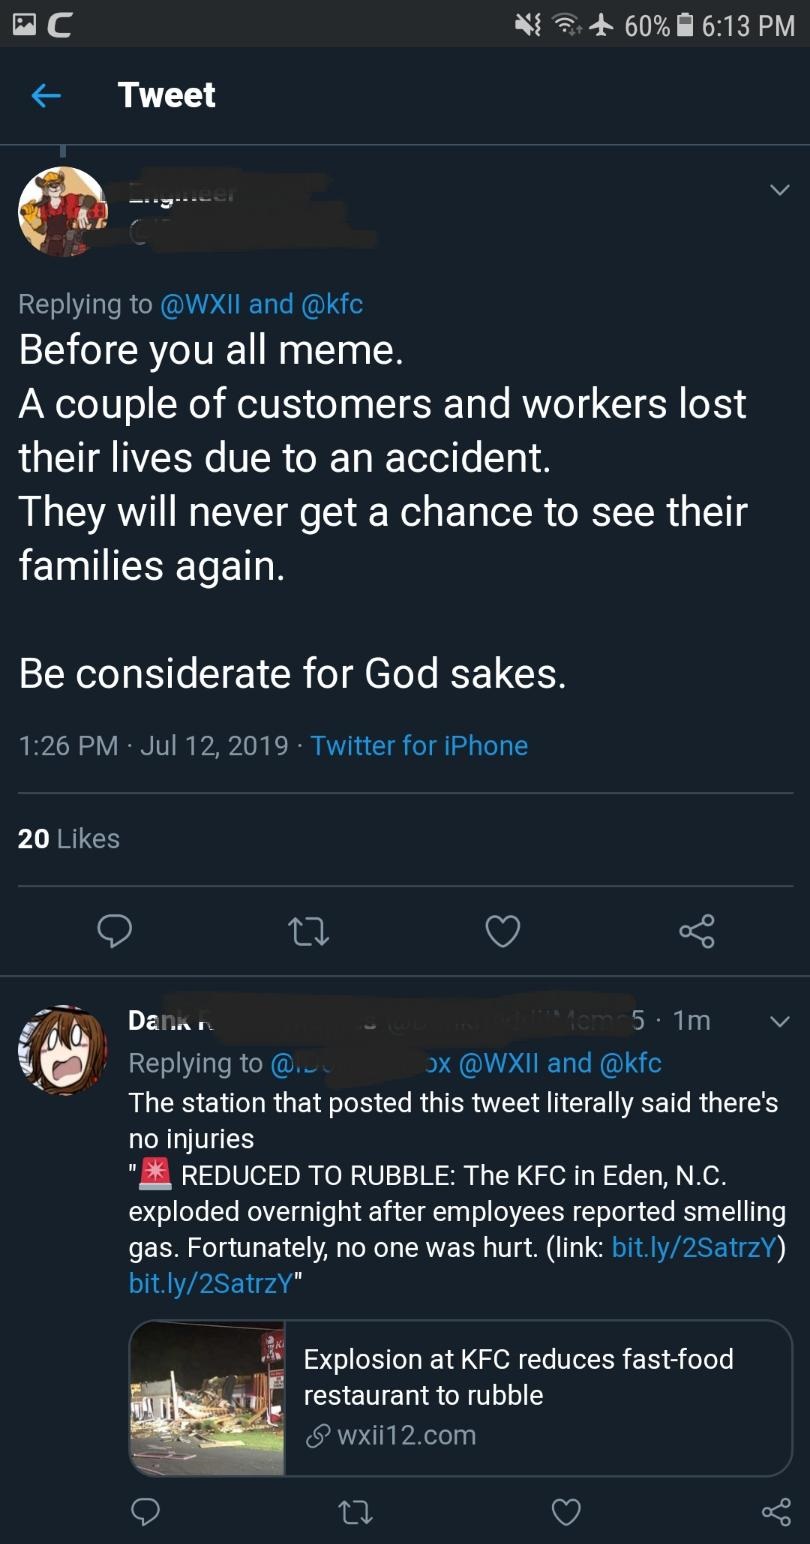 Tweet and Before you all meme. A couple of customers and workers lost their lives due to an accident. They will never get a chance to see their families again. Be considerate for God sakes.